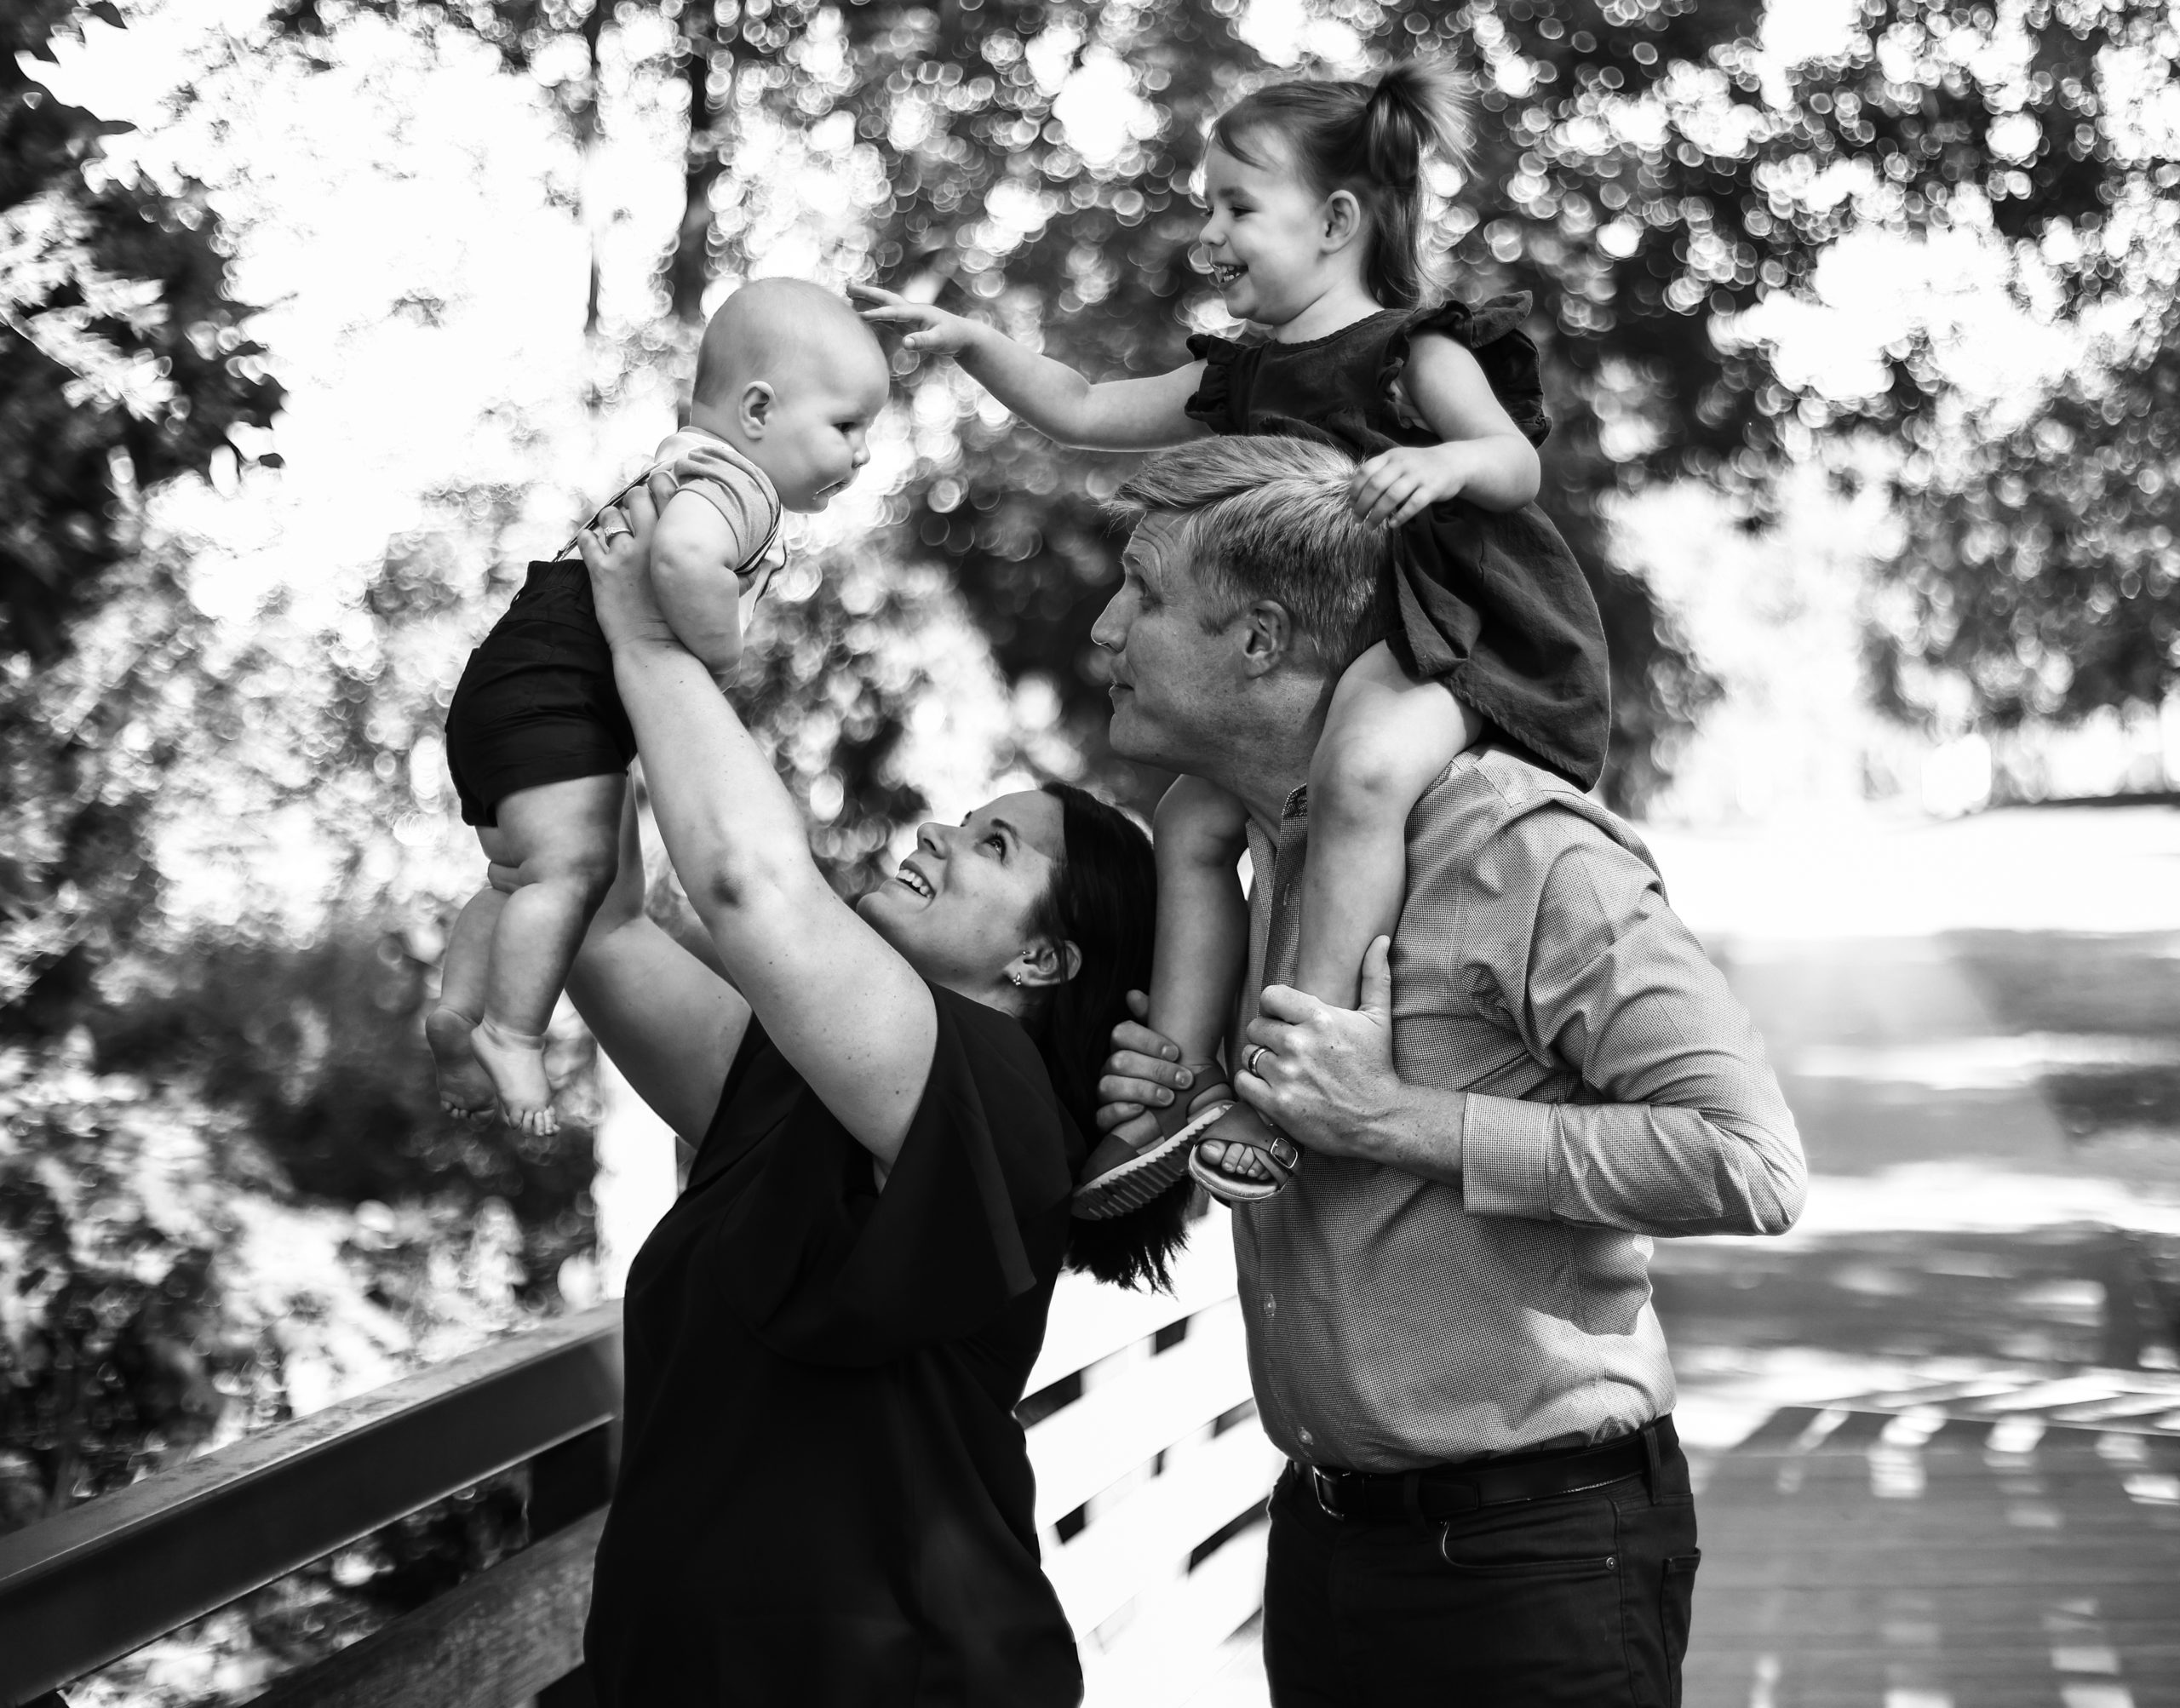 A woman and man, outdoors on a bridge, with two young children. The woman is holding the younger child above her and the man is holding the other child on his shoulders. How to look great in photos.